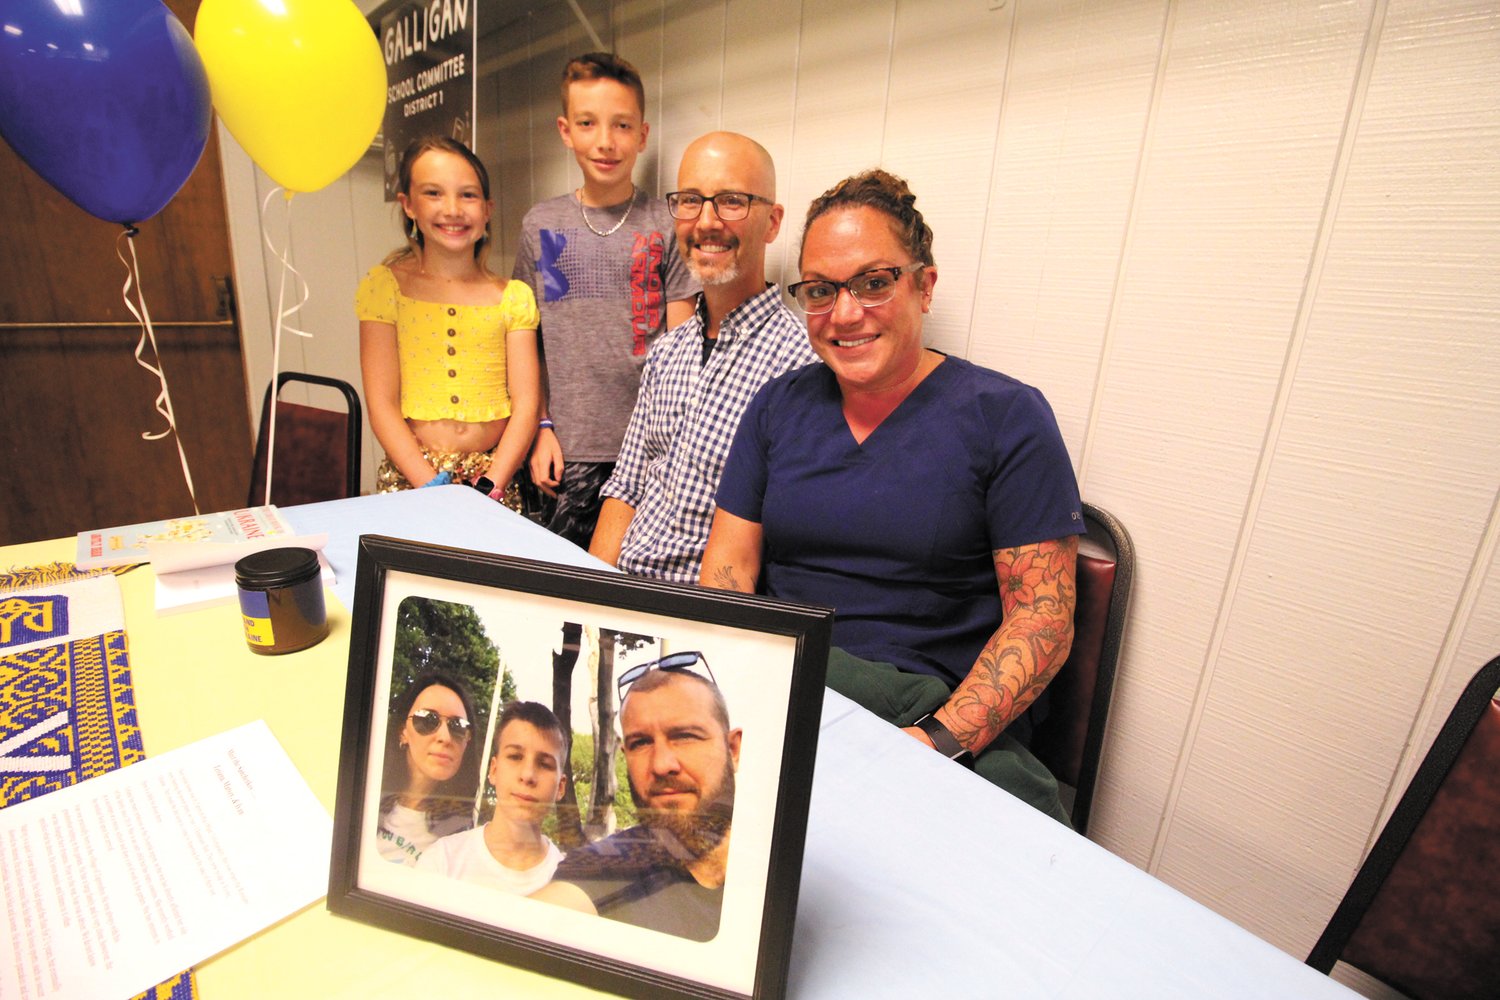 WARWICK COULD BE THEIR HOME: John, Stacey, Jacoby and Natalie Schmidt with a picture of the Sabchenko family, now living in Ukraine, who they will welcome into their Warwick home once cleared to come to this country. (Herald photo)